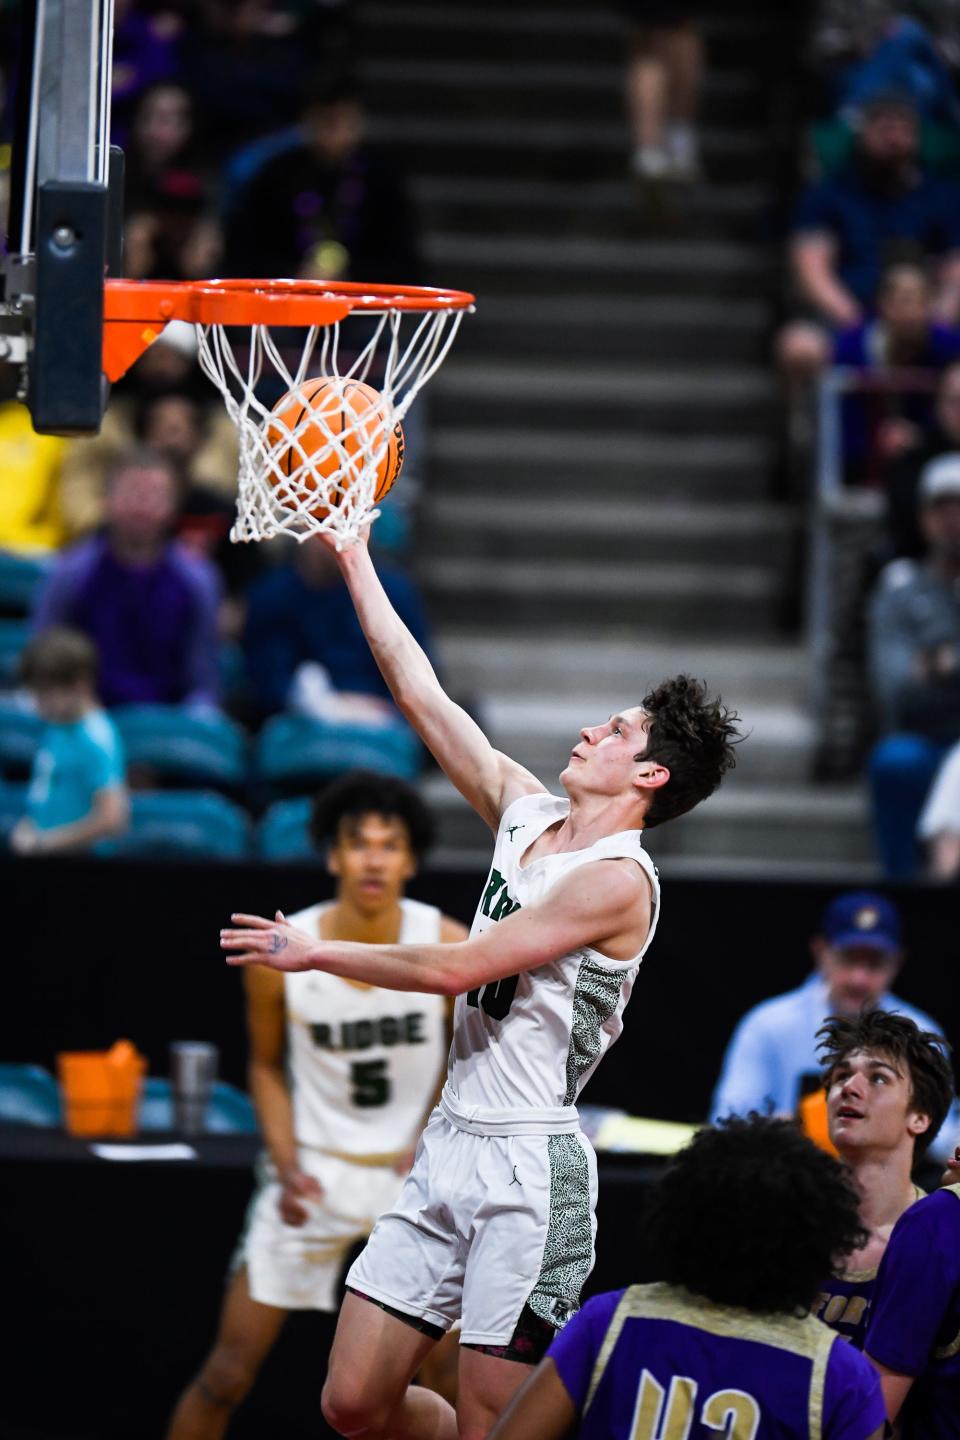 Fossil Ridge boys basketball player Ty Brown scores a layup during a 6A Great 8 game against Fort Collins at the Denver Coliseum on March 4.